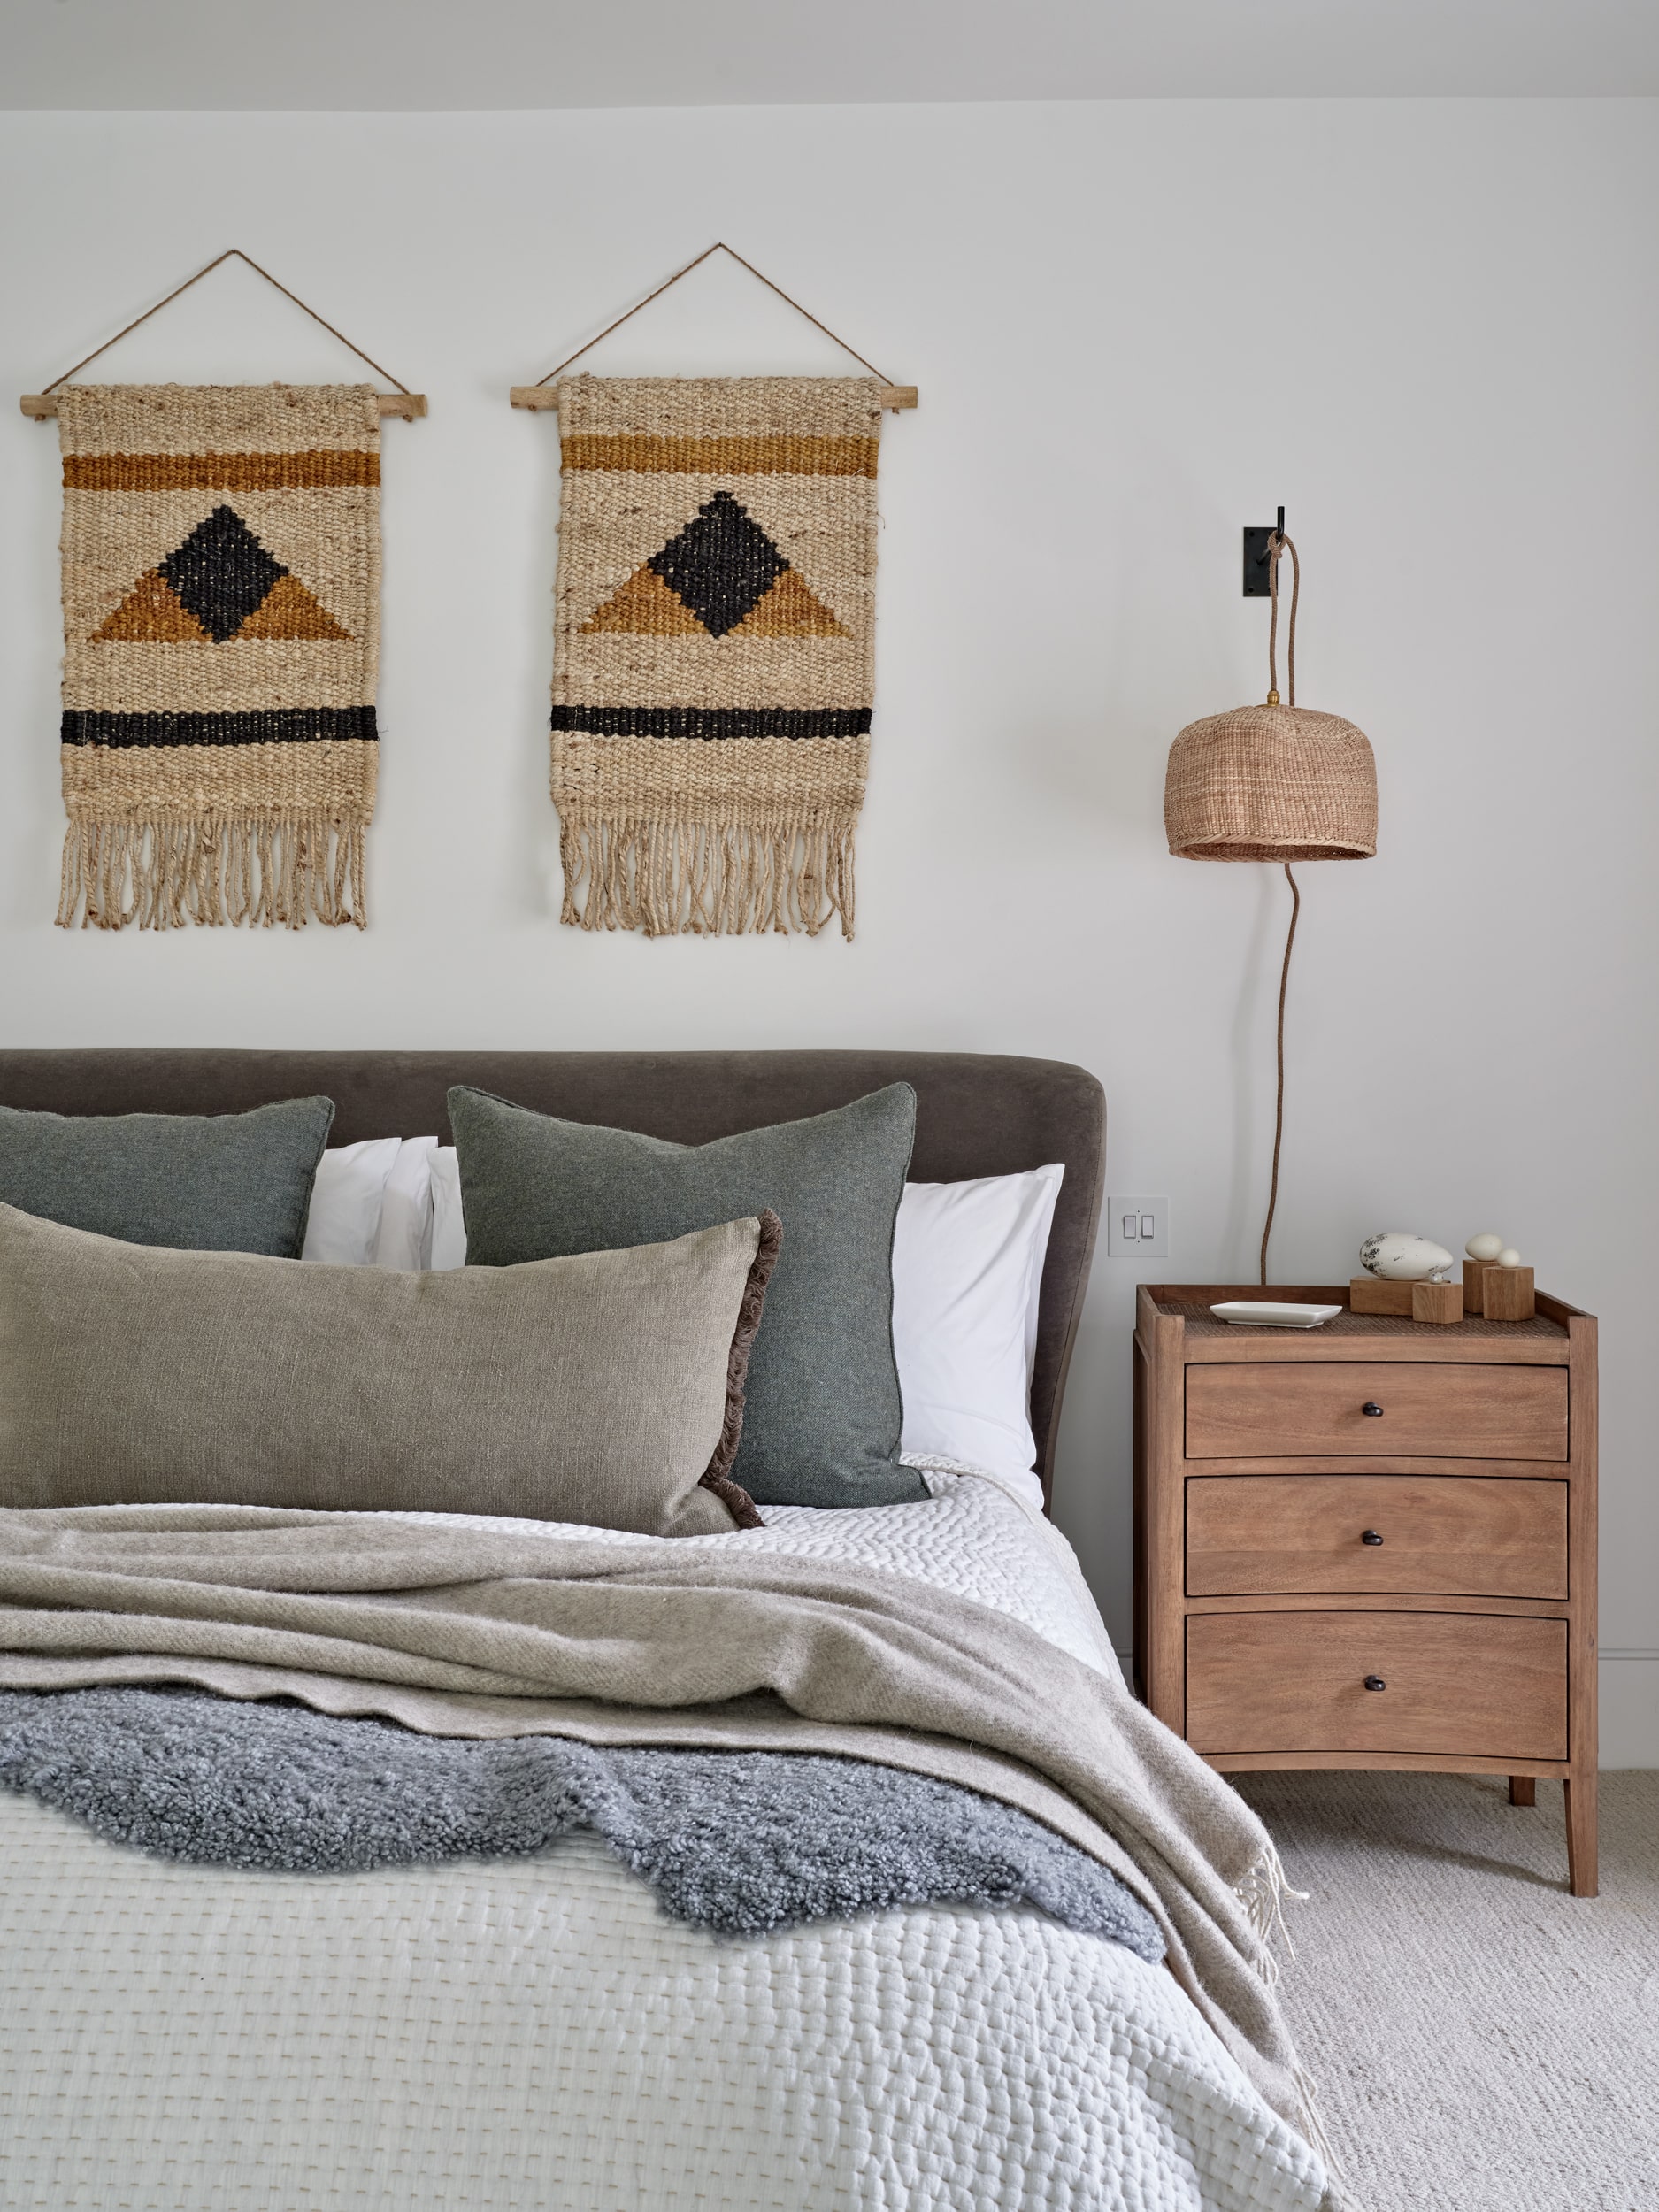 Brown wood bedside table with rattan pendant light above in coastal style bedroom.